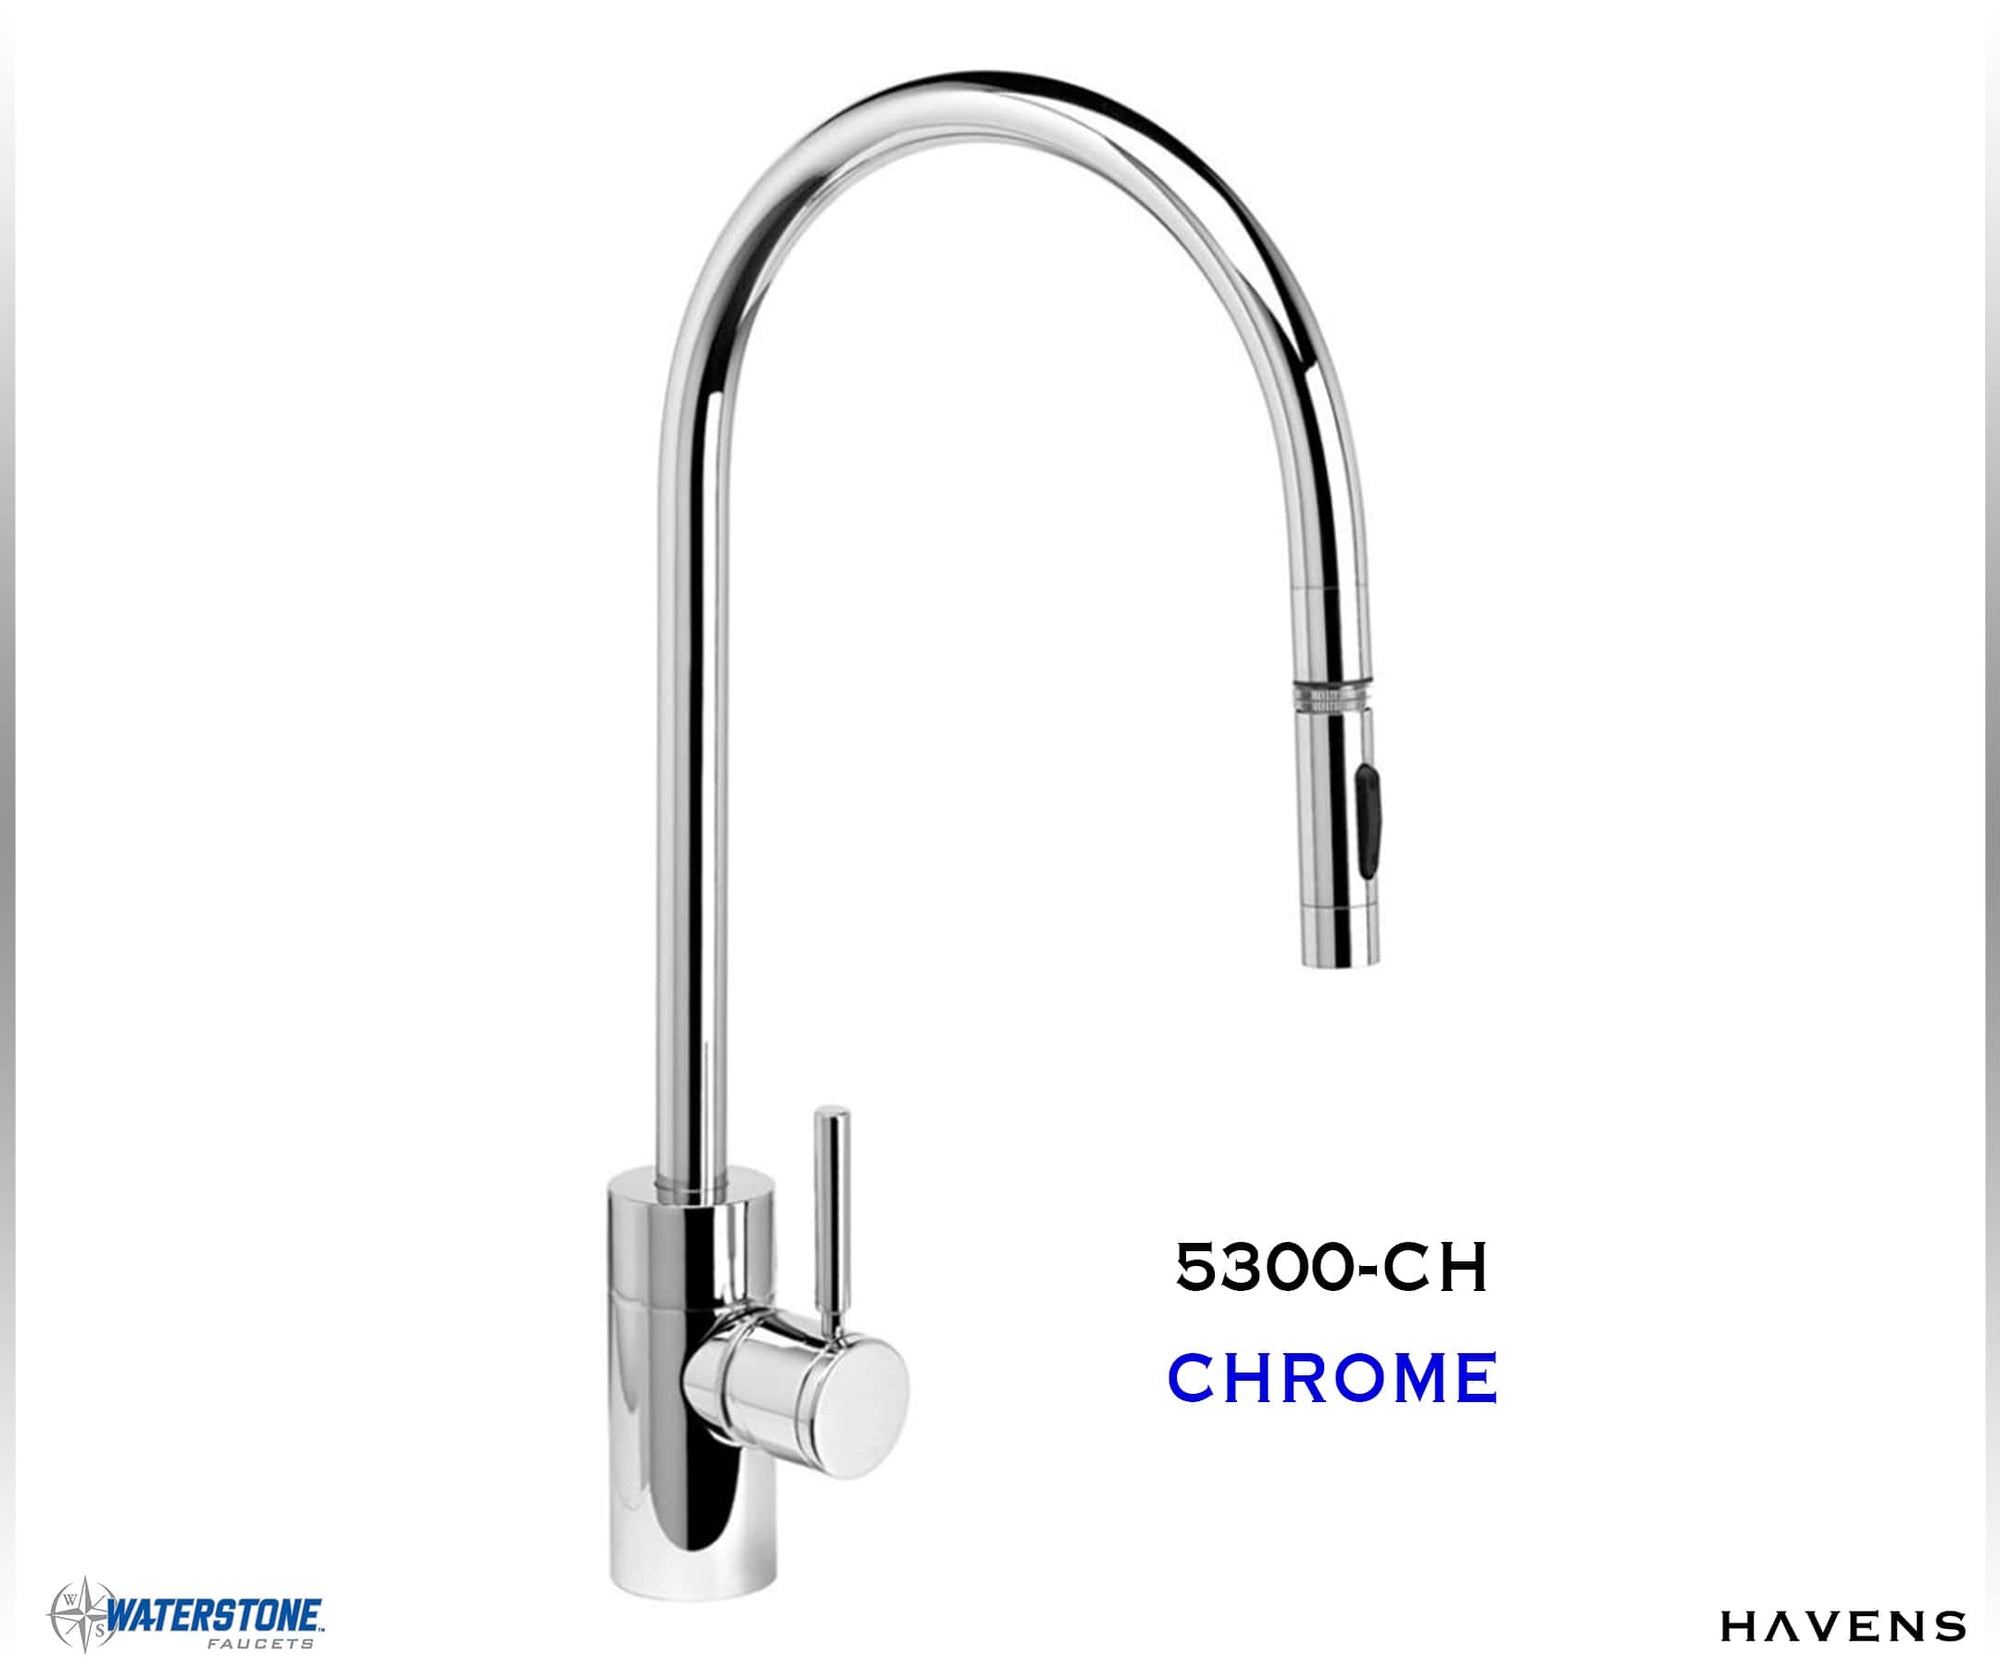 Waterstone Contemporary Extended Reach PLP Pulldown Faucet - 5300